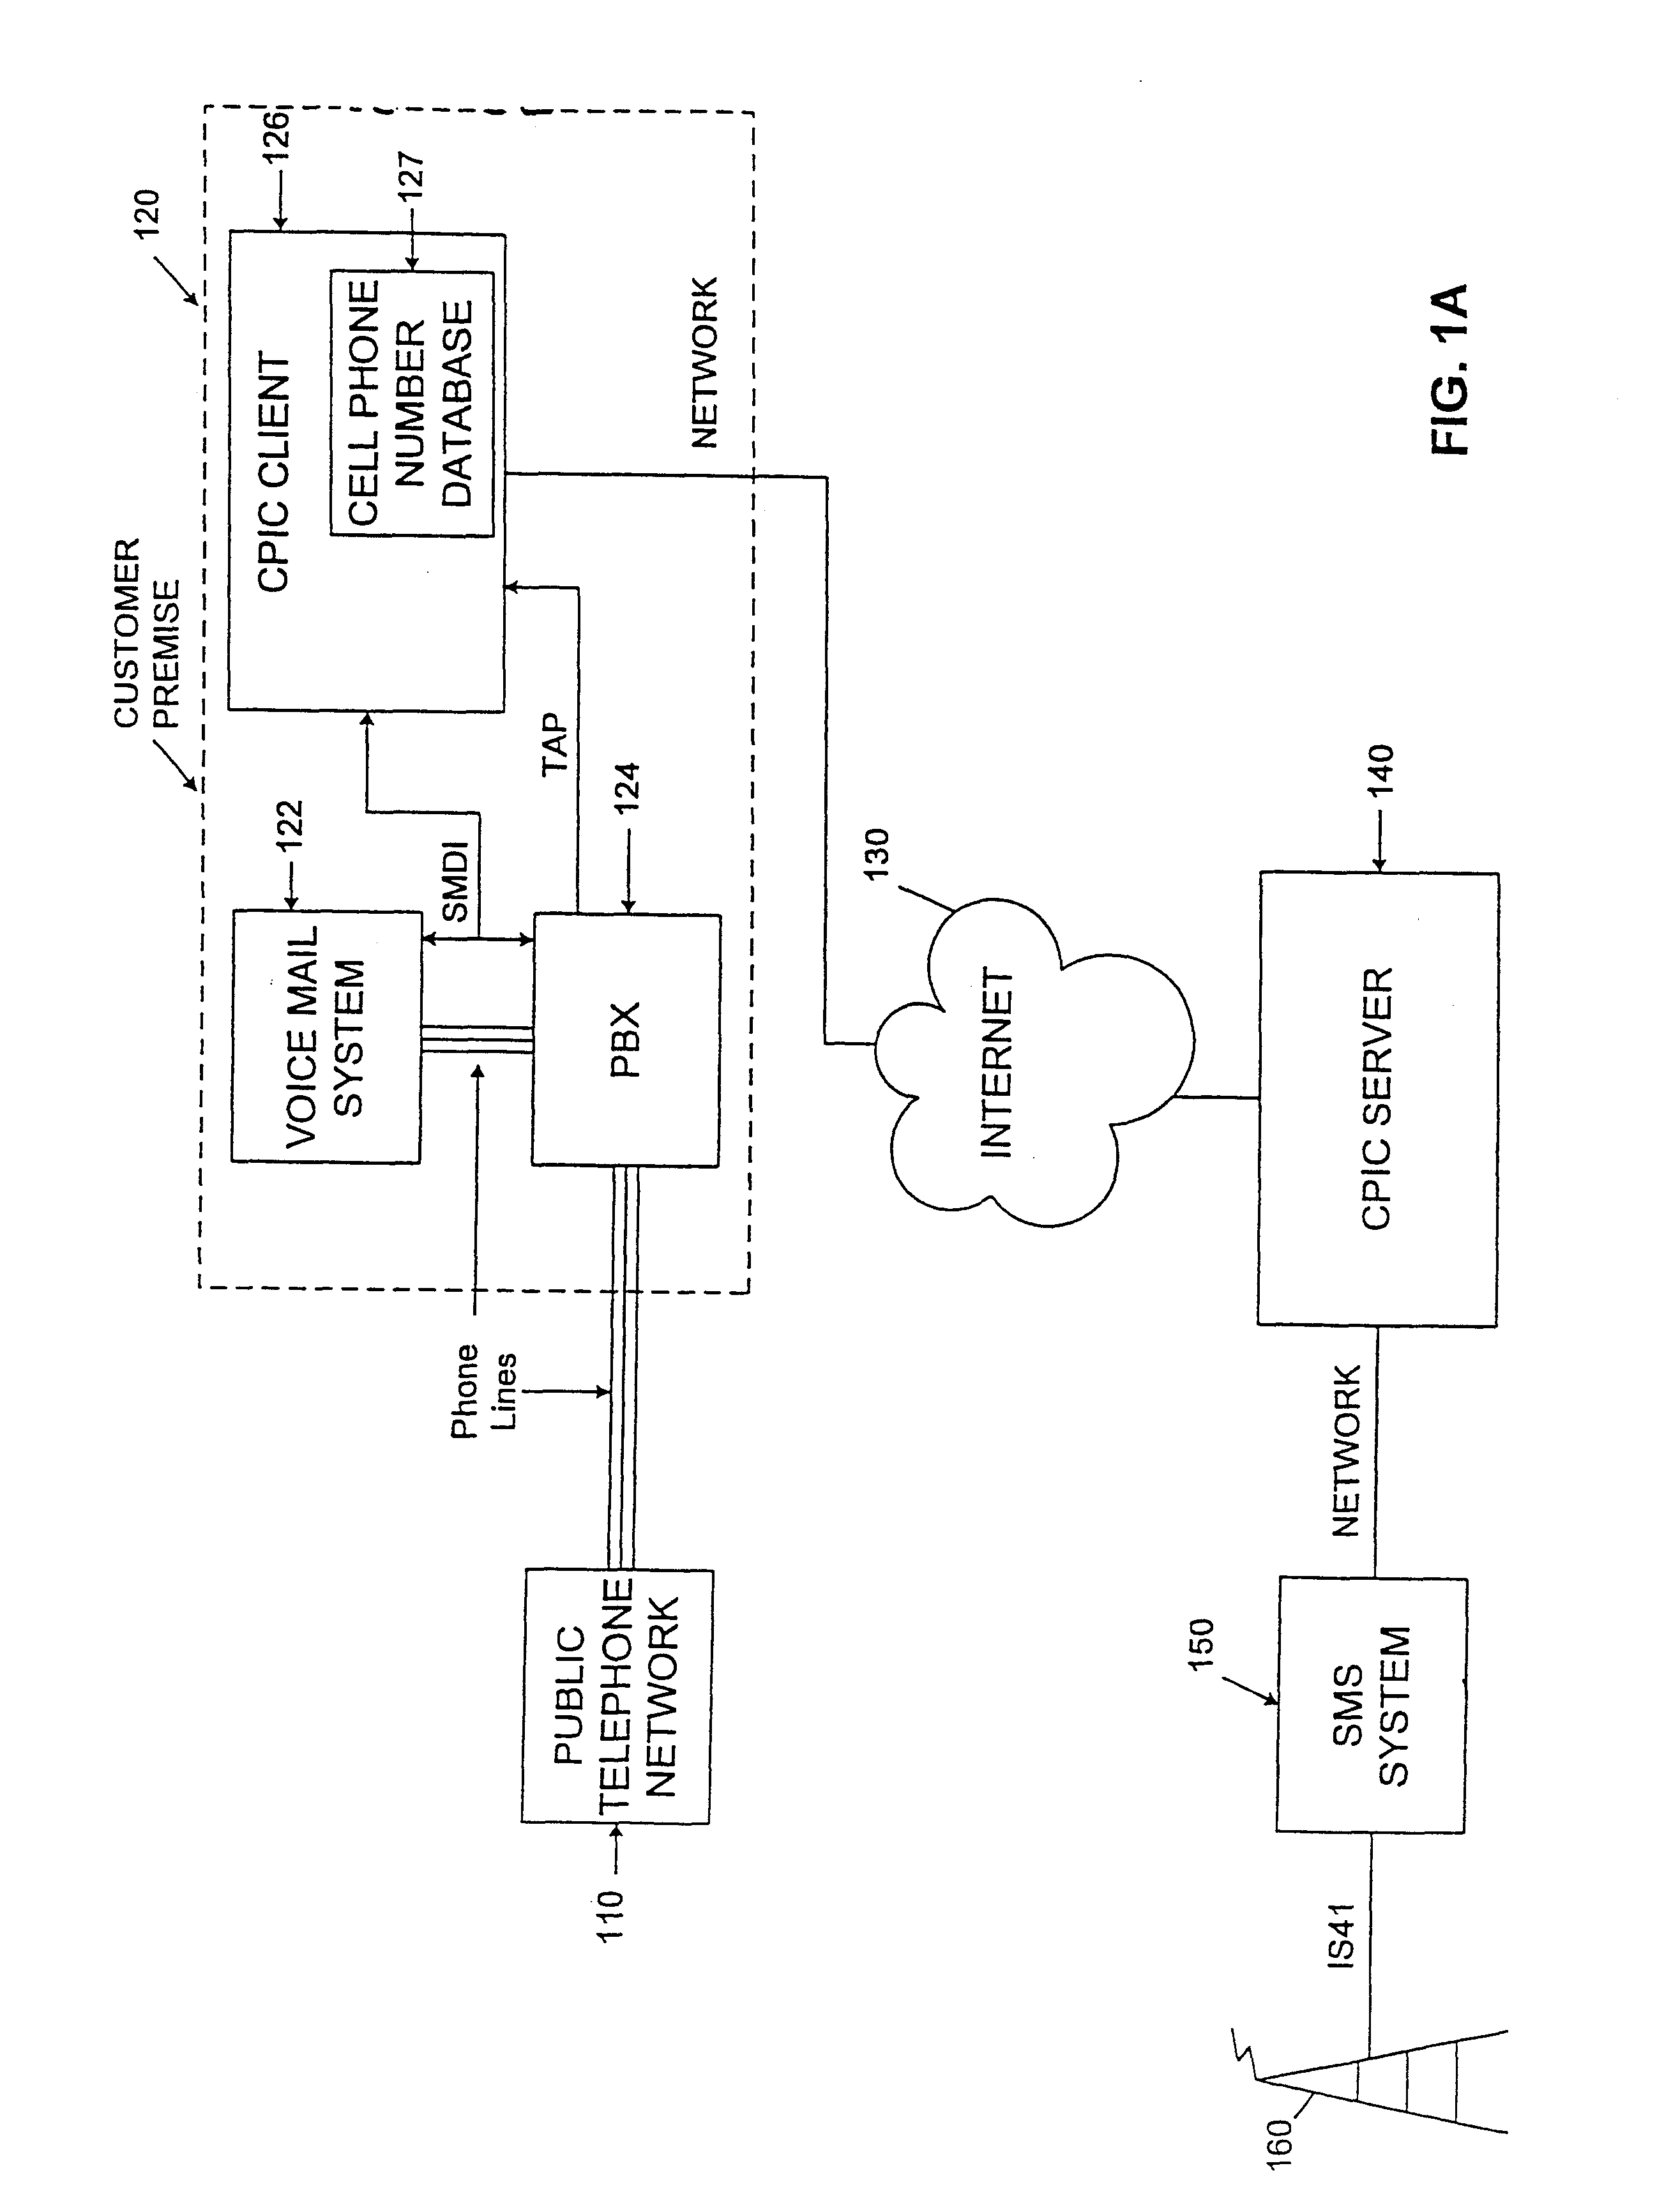 System and method for notifying a user of voice mail messages at a cell phone site